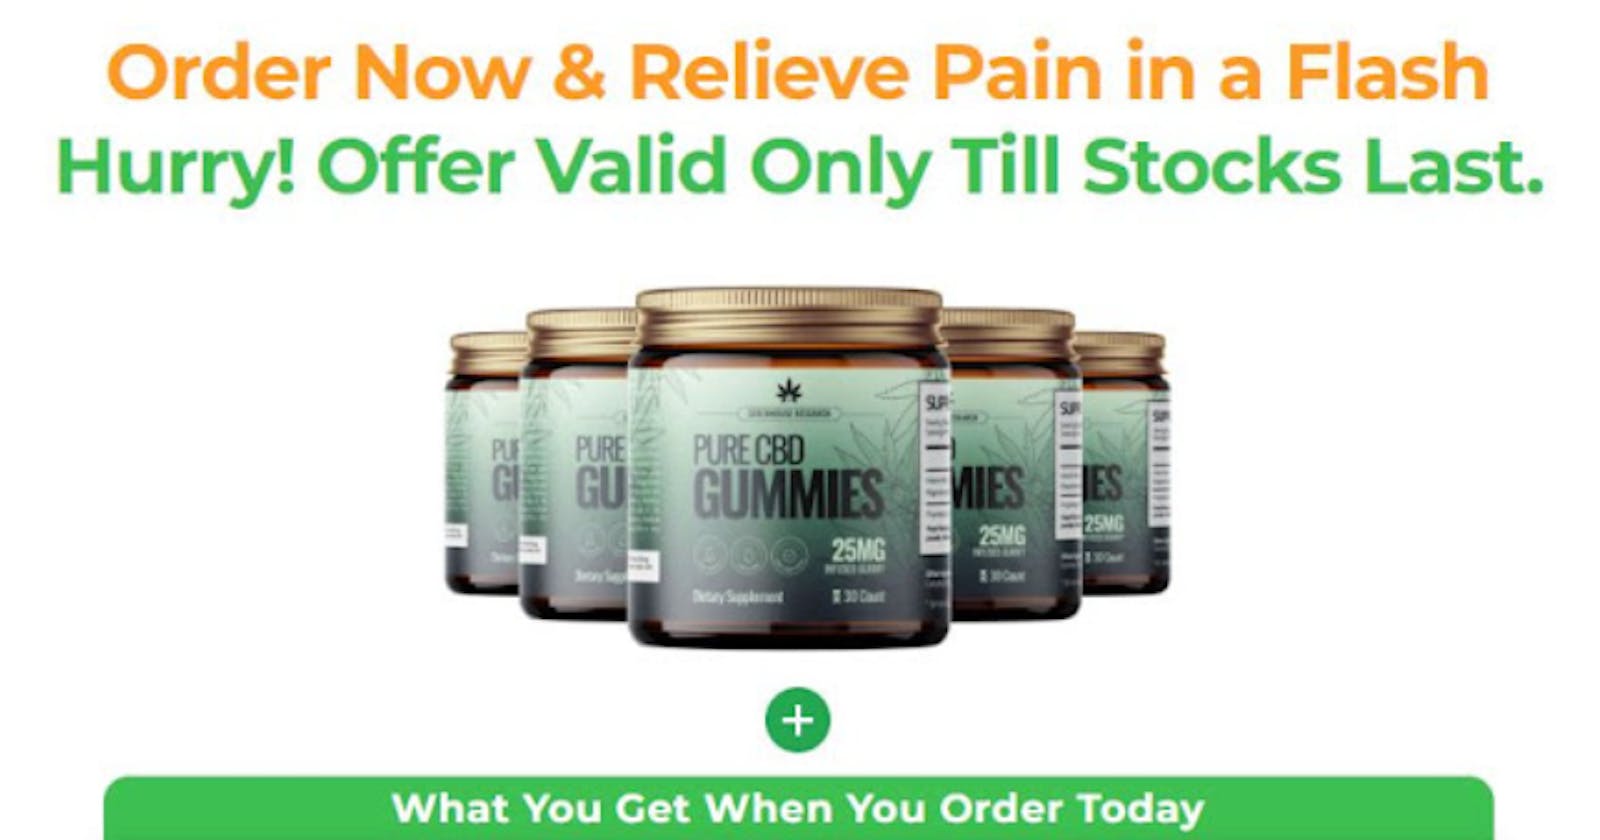 Some CBD Gummies For Pain Relife?